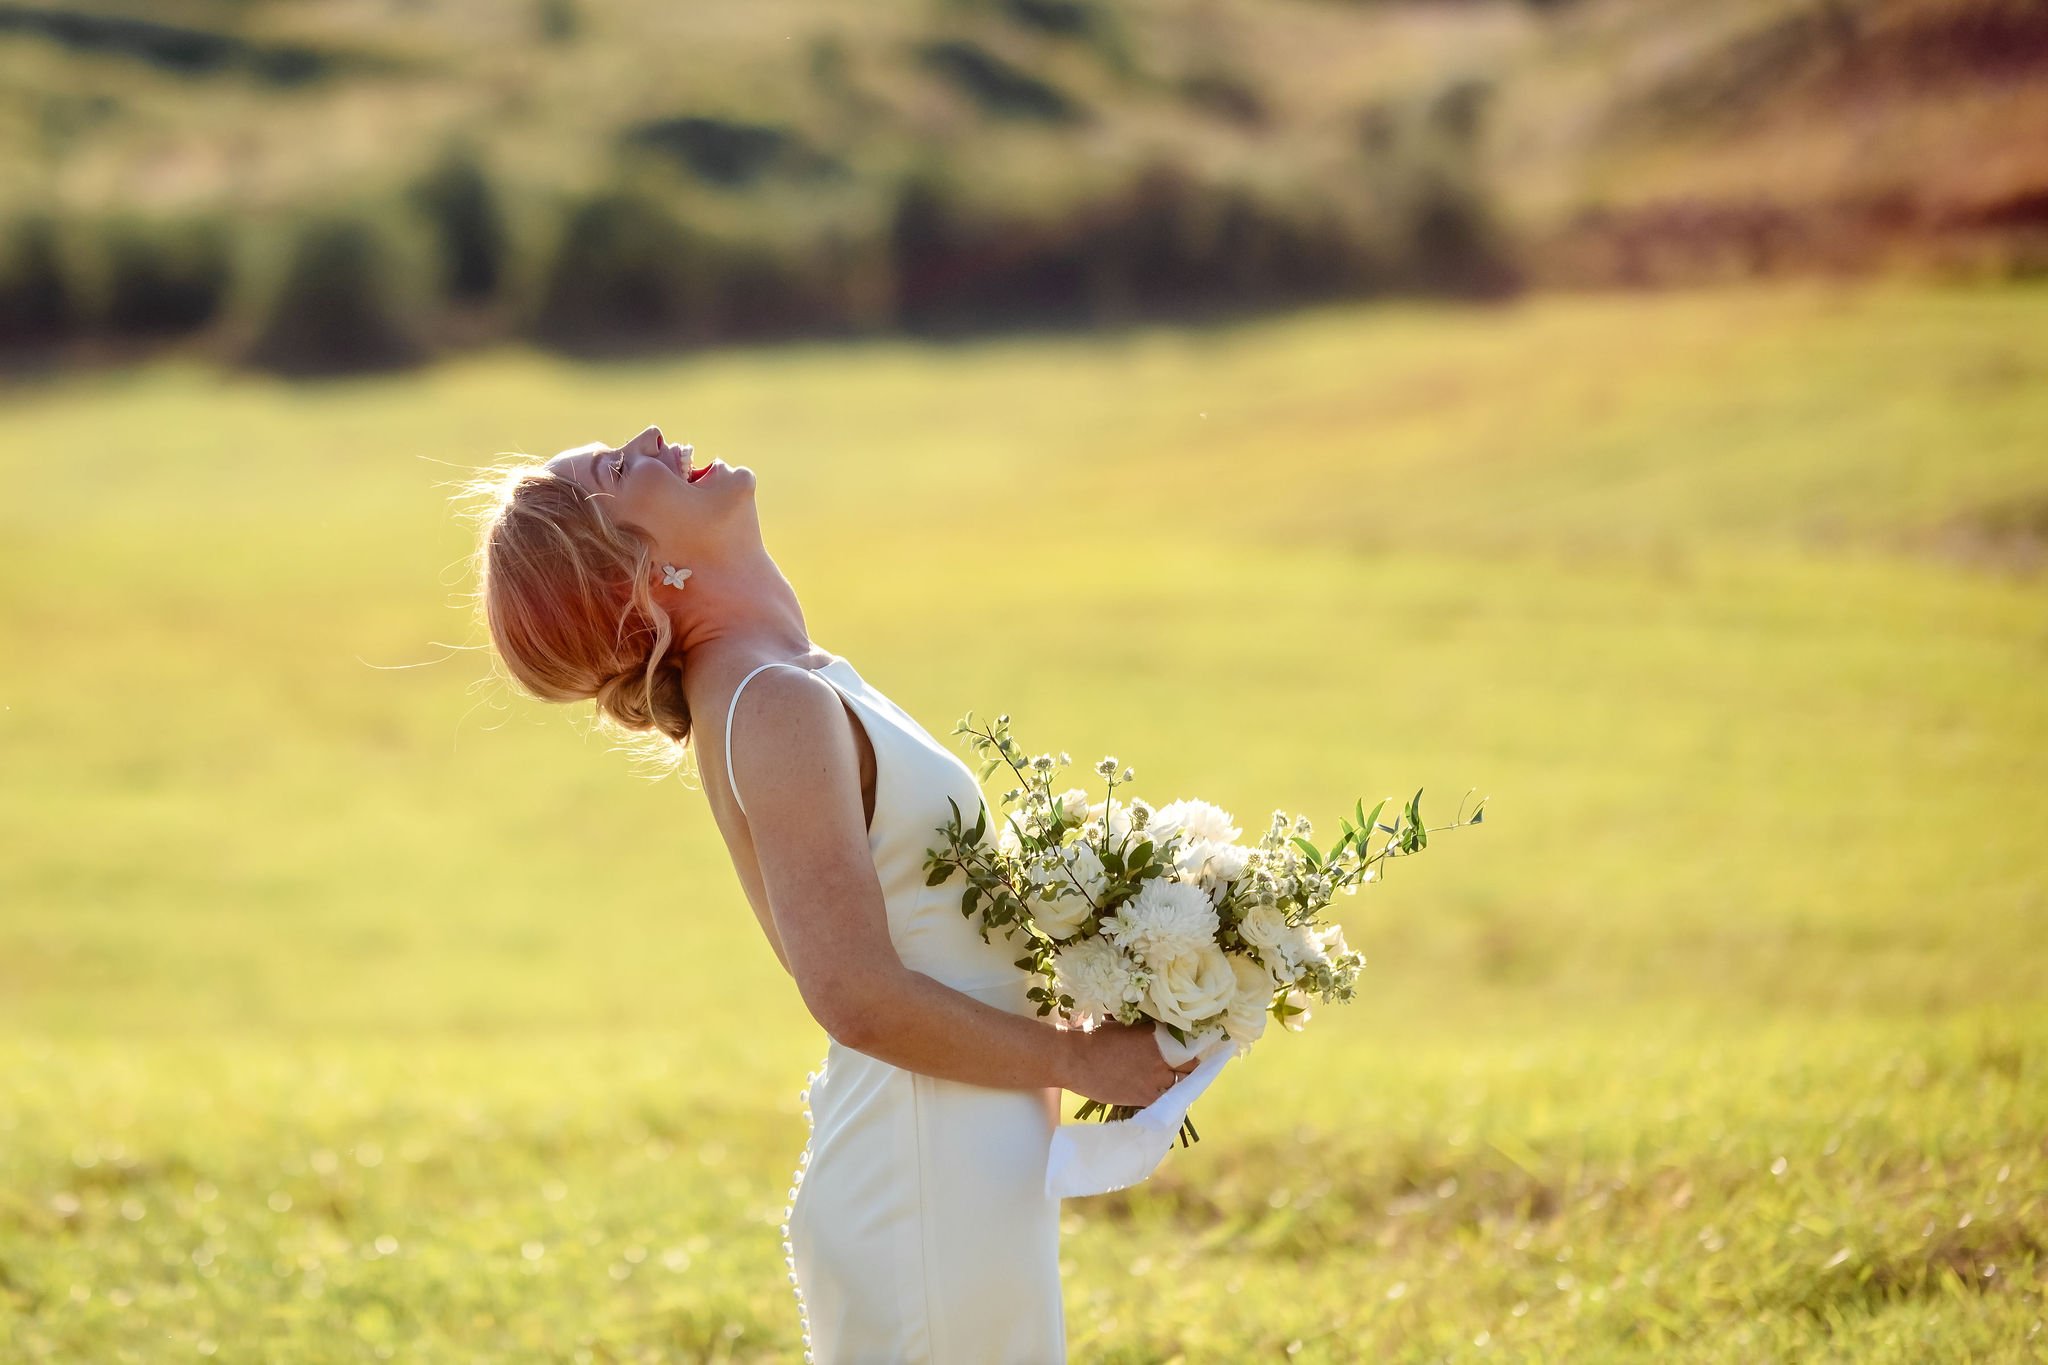 great candid photo of a bride laughing